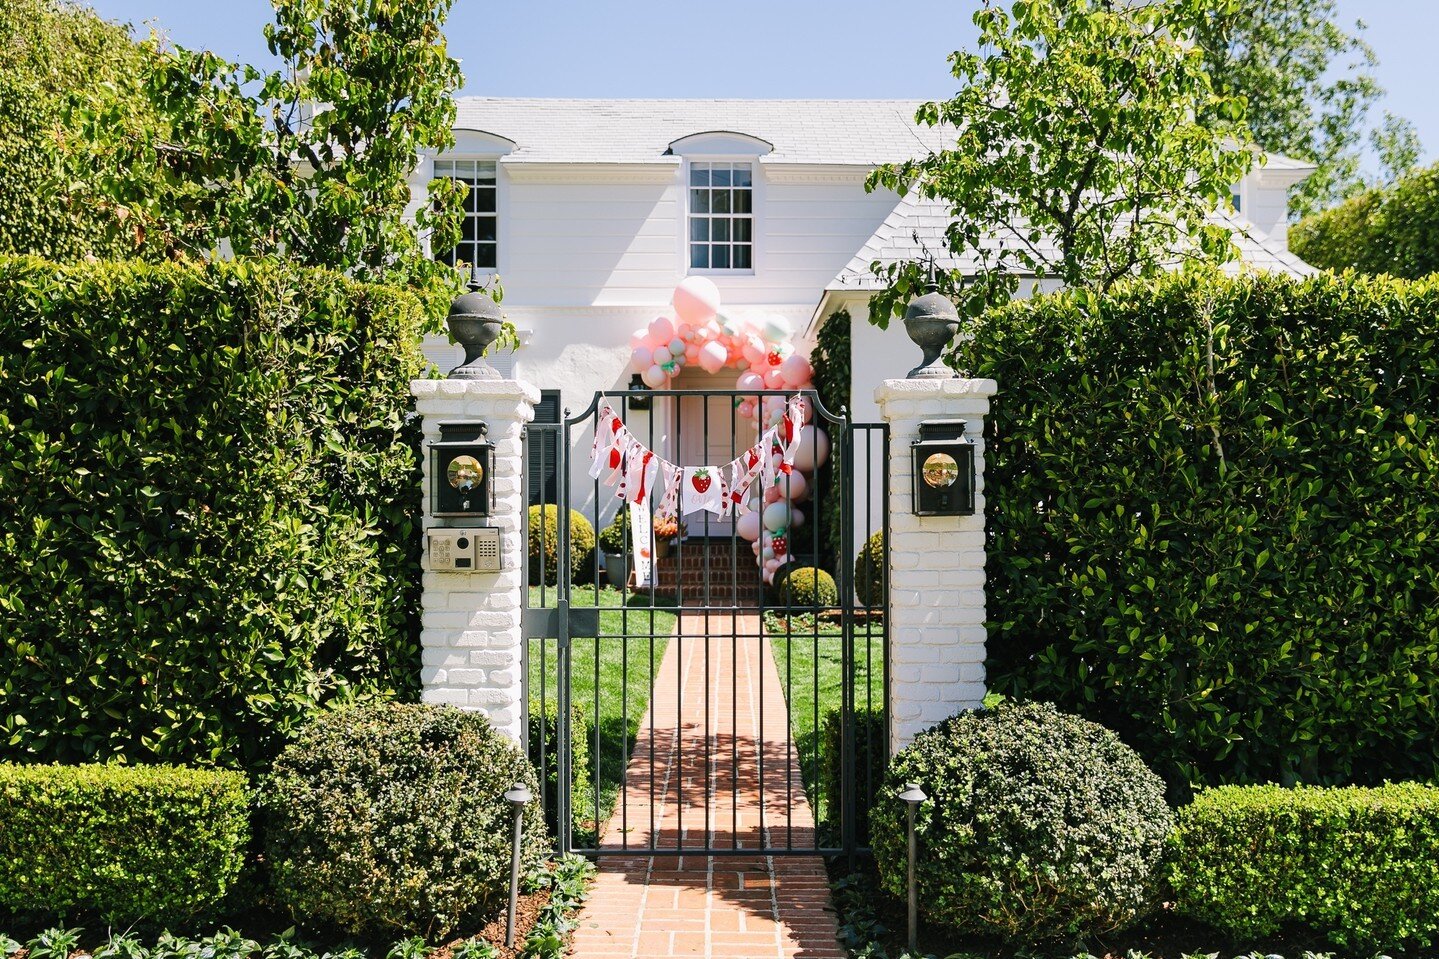 The most picturesque little home party entry I ever did see!⁠
&bull;⁠
&bull;⁠
&bull;⁠
&bull;⁠
&bull;⁠
#billyedonyaphotography  #marthastewart #colorfullycrafted #popyacolor #abmlifeissweet #partydesign #kidspartyphoto #kidsparty #kidspartyideas #part